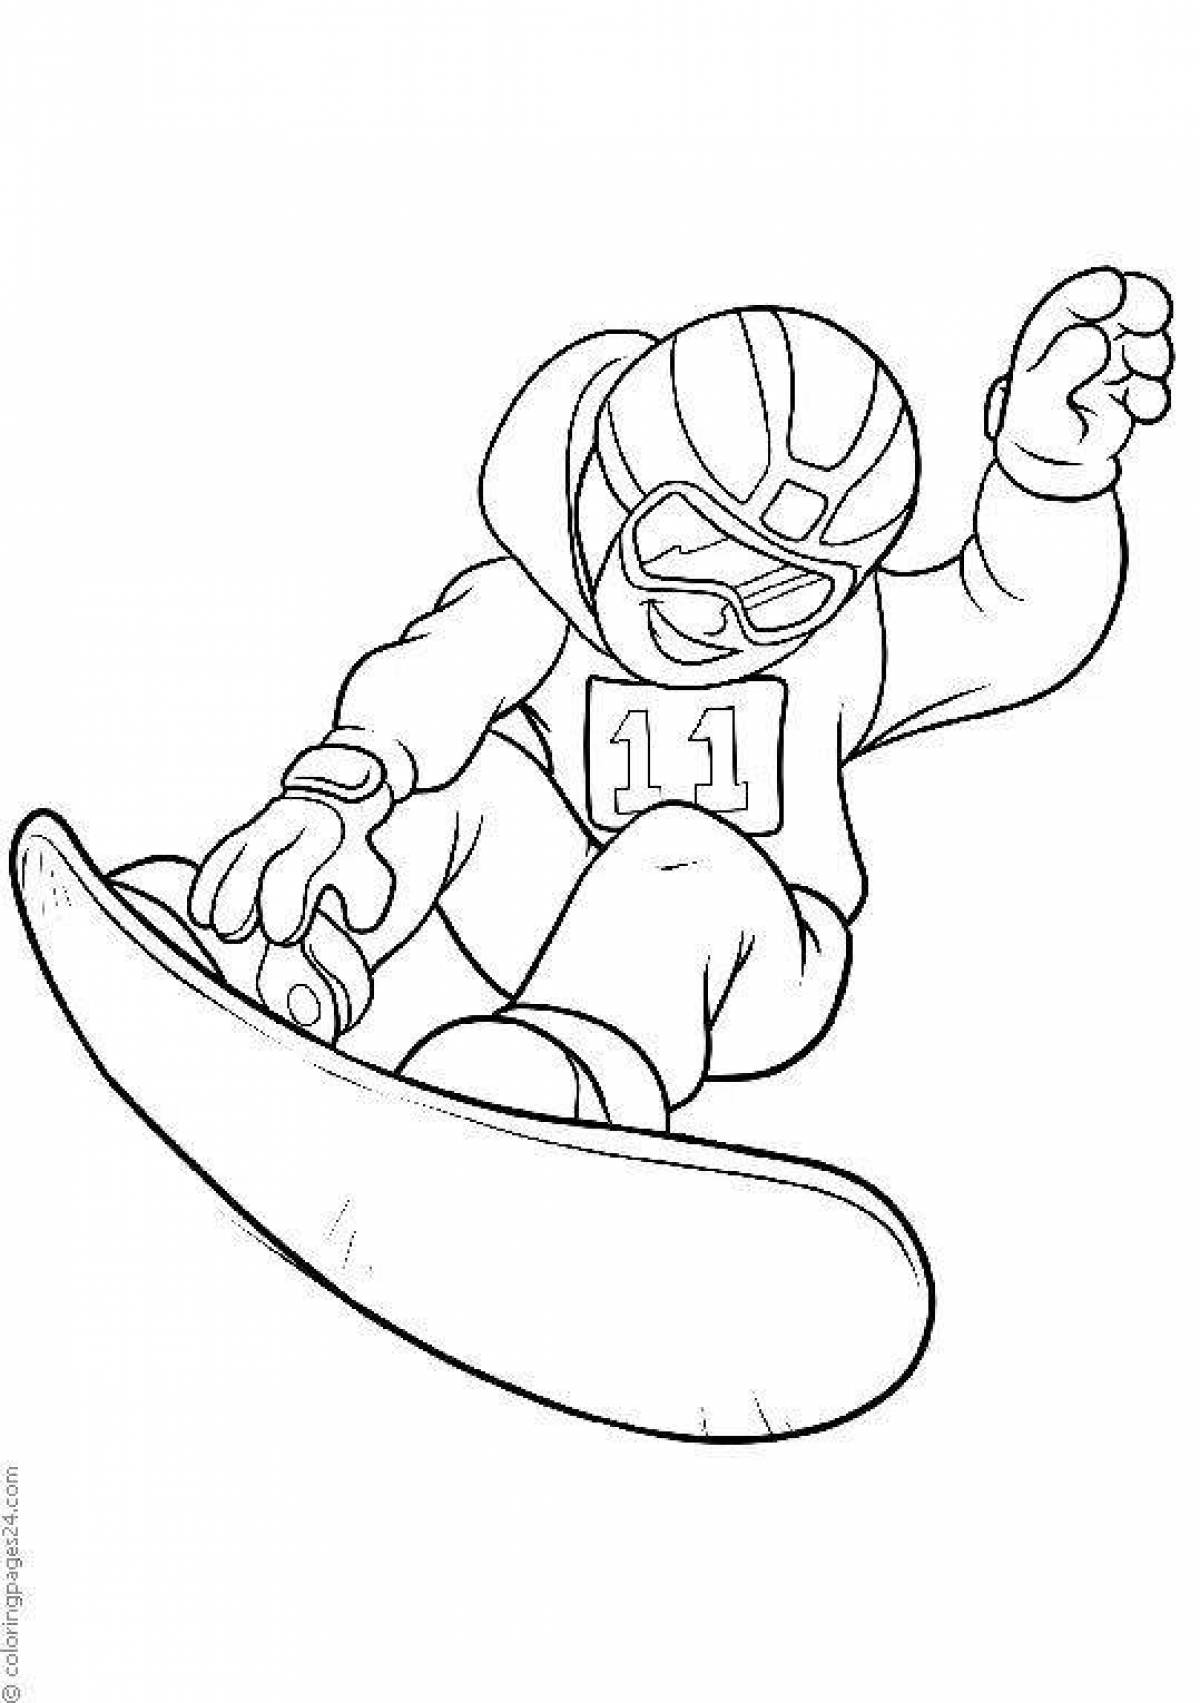 Coloring book determined snowboarder